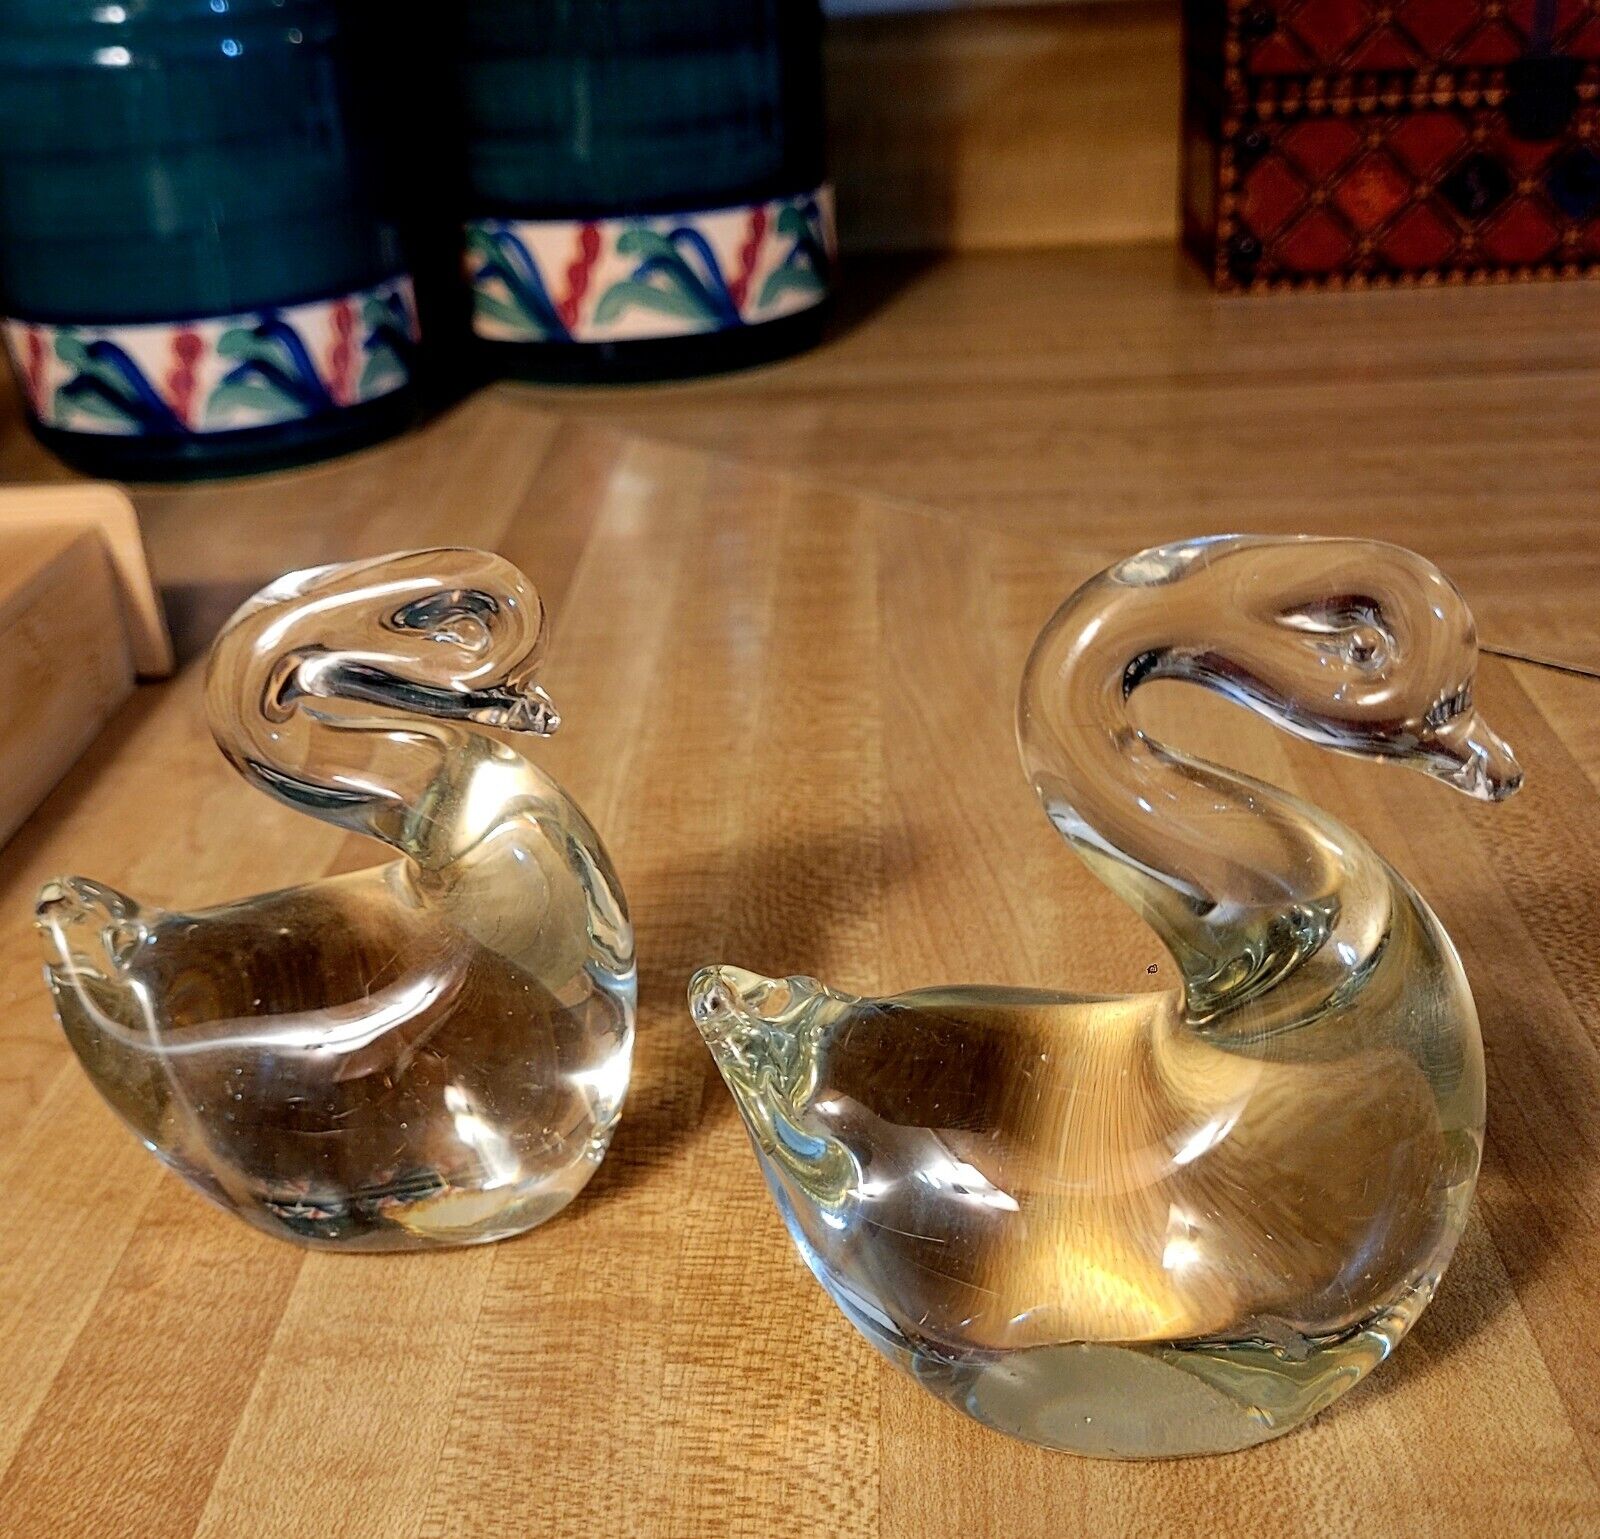 2 Vintage Glass Paperweights - Swans (Action International)